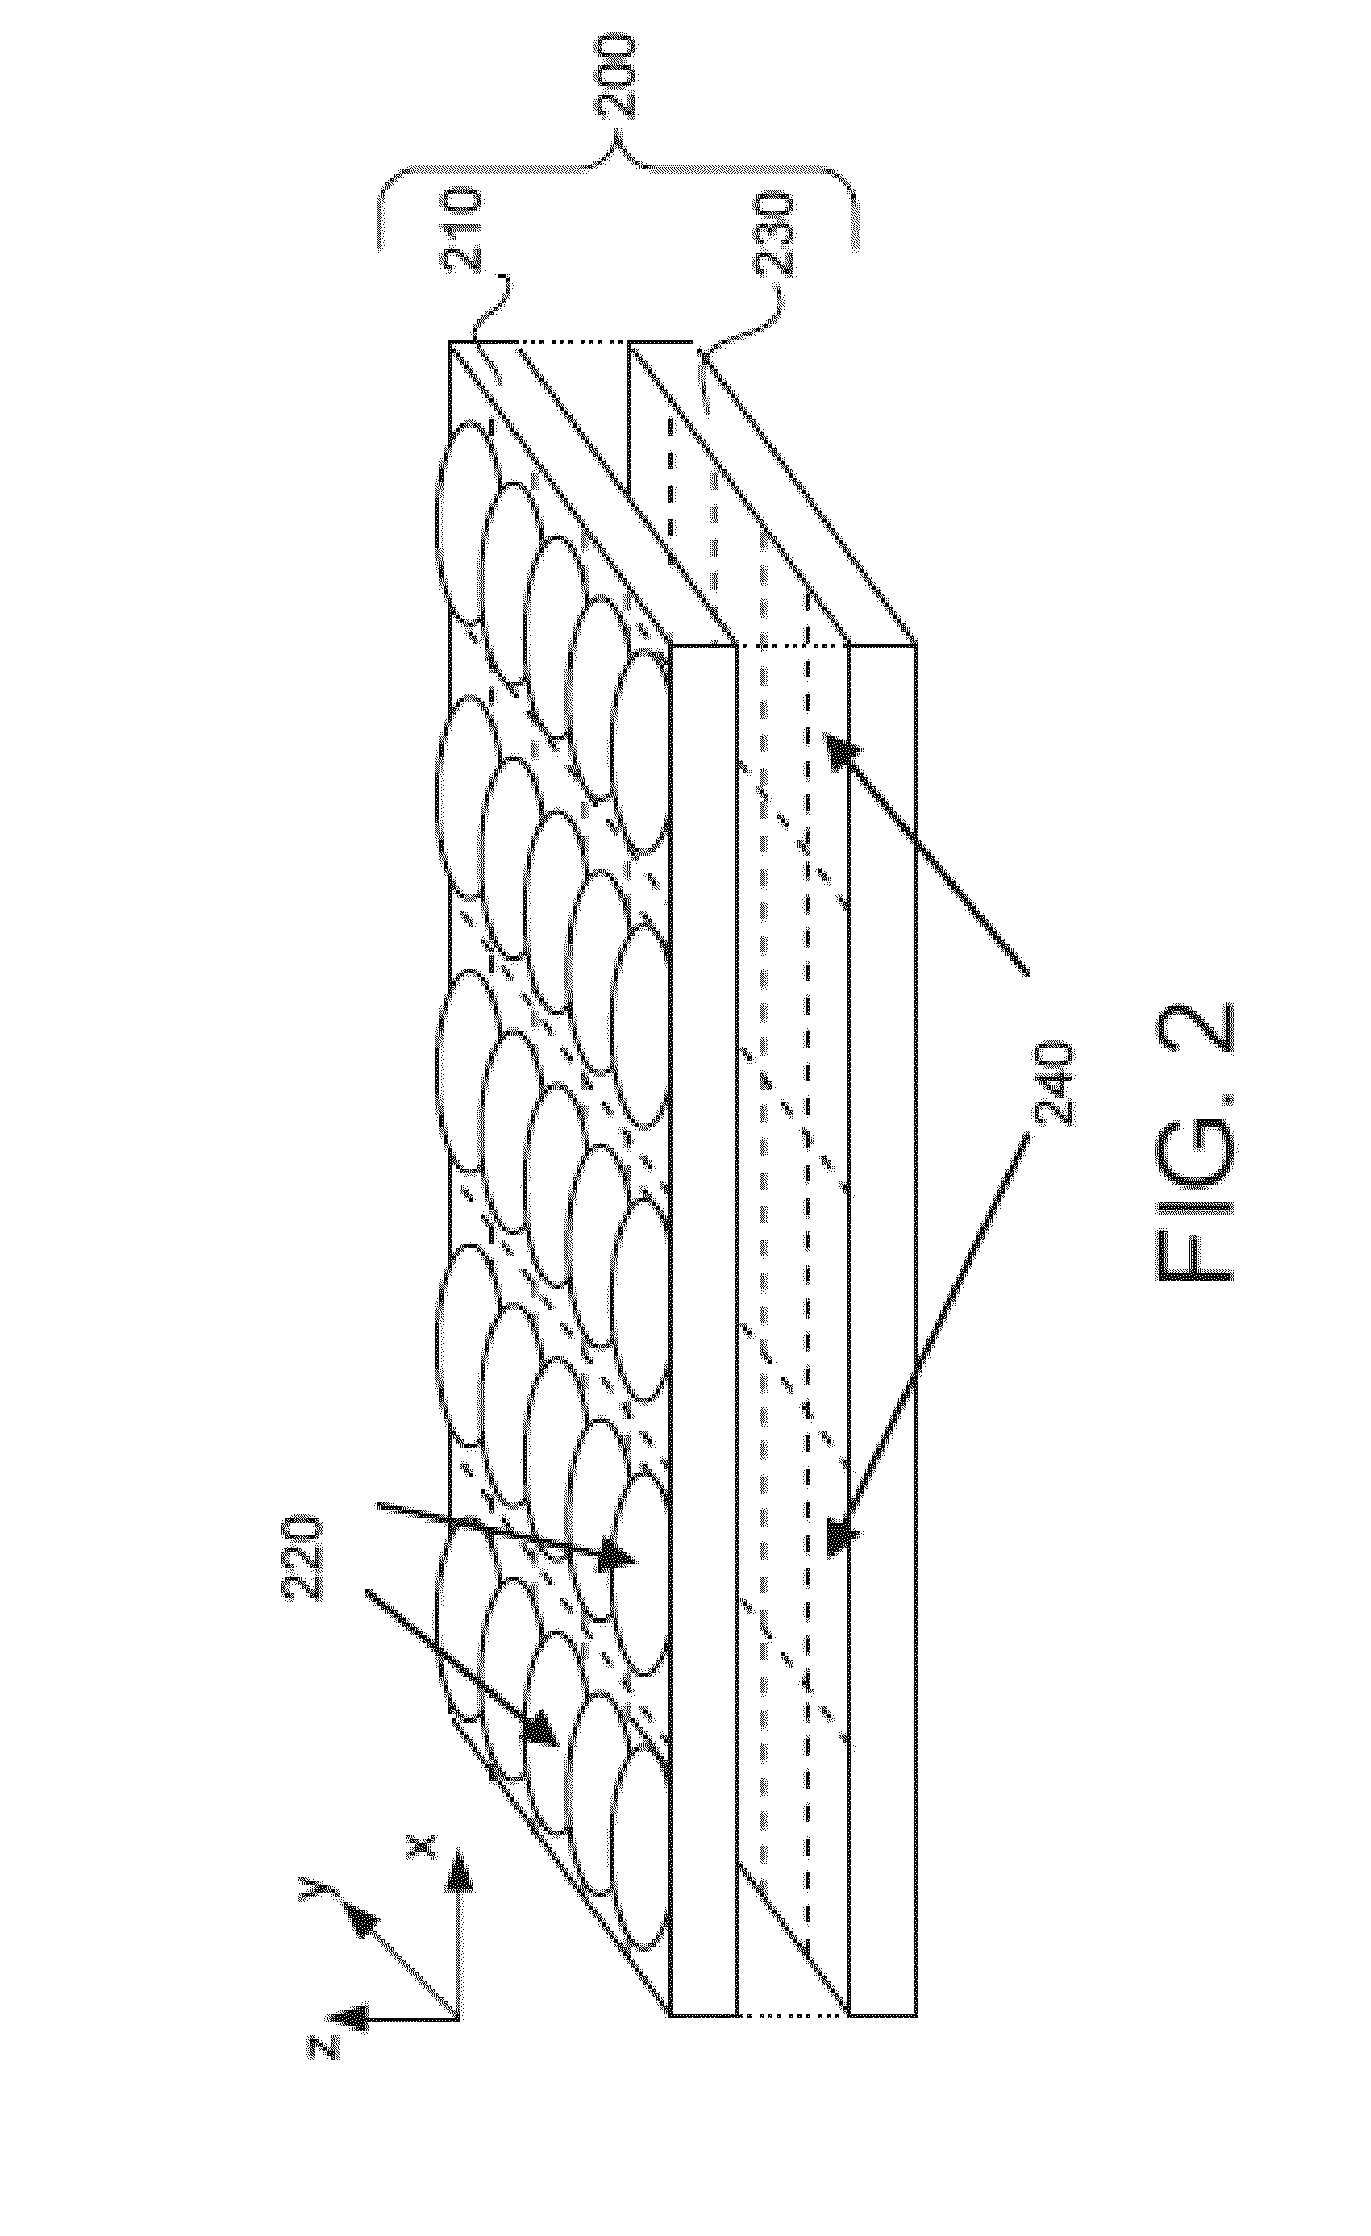 Systems and methods for controlling aliasing in images captured by an array camera for use in super-resolution processing